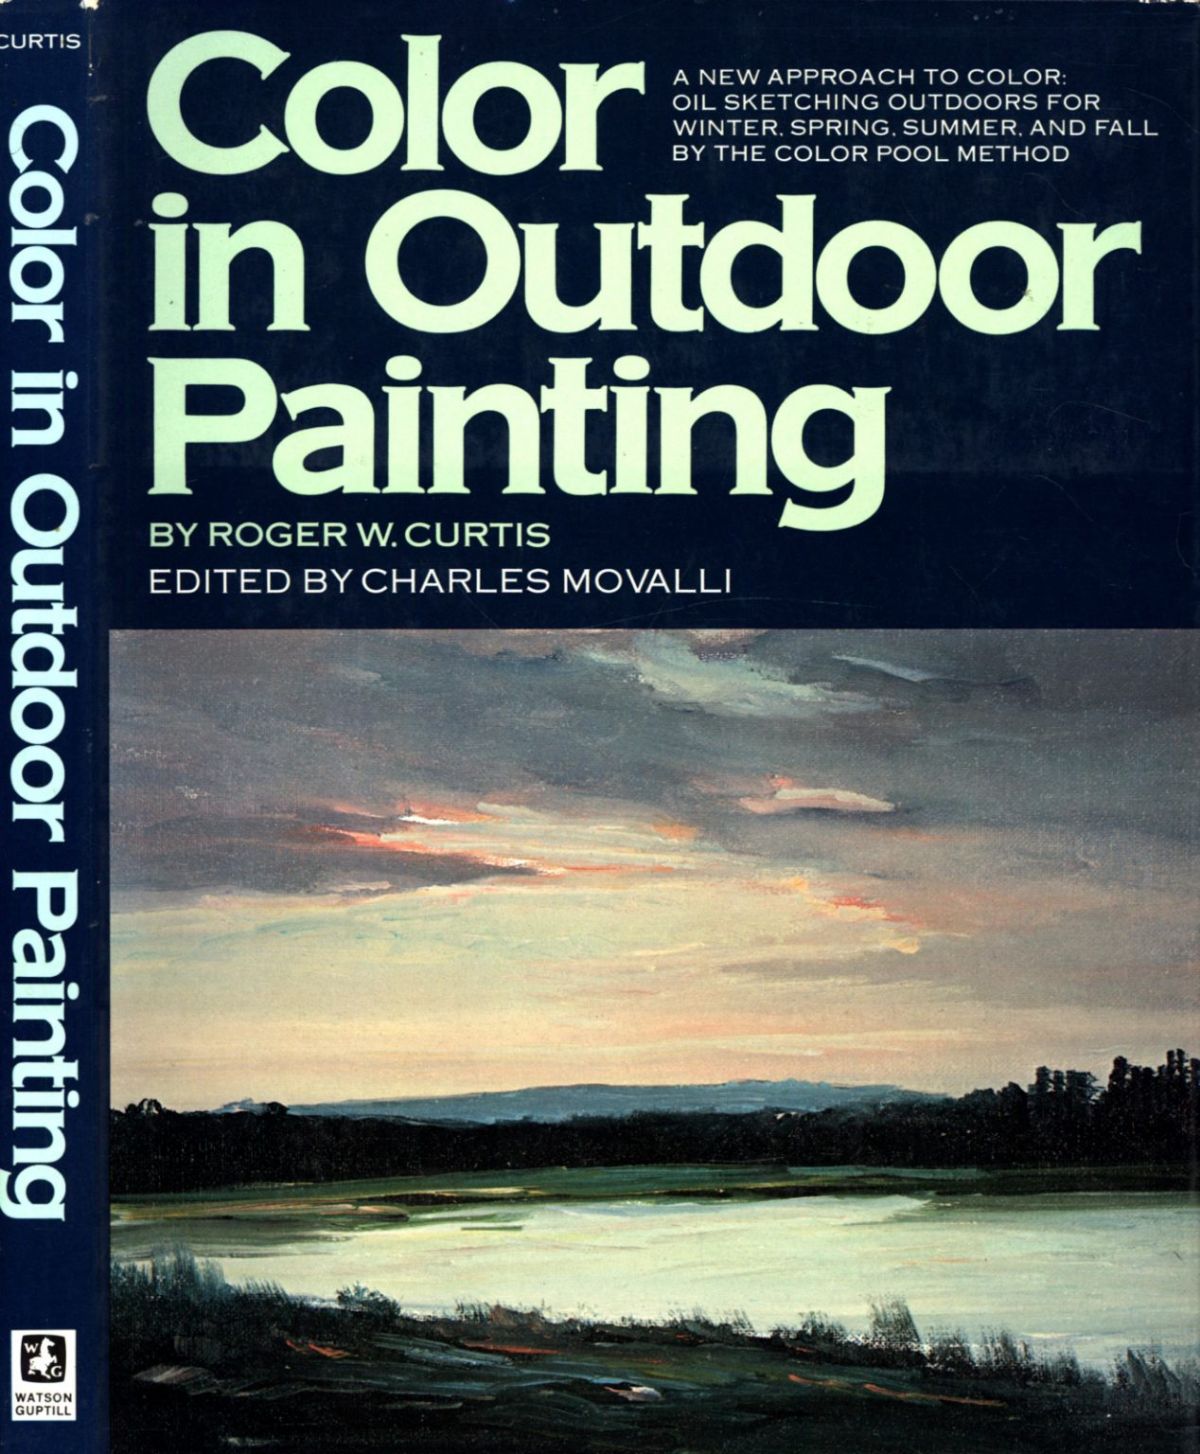 COLOR IN OUTDOOR PAINTING